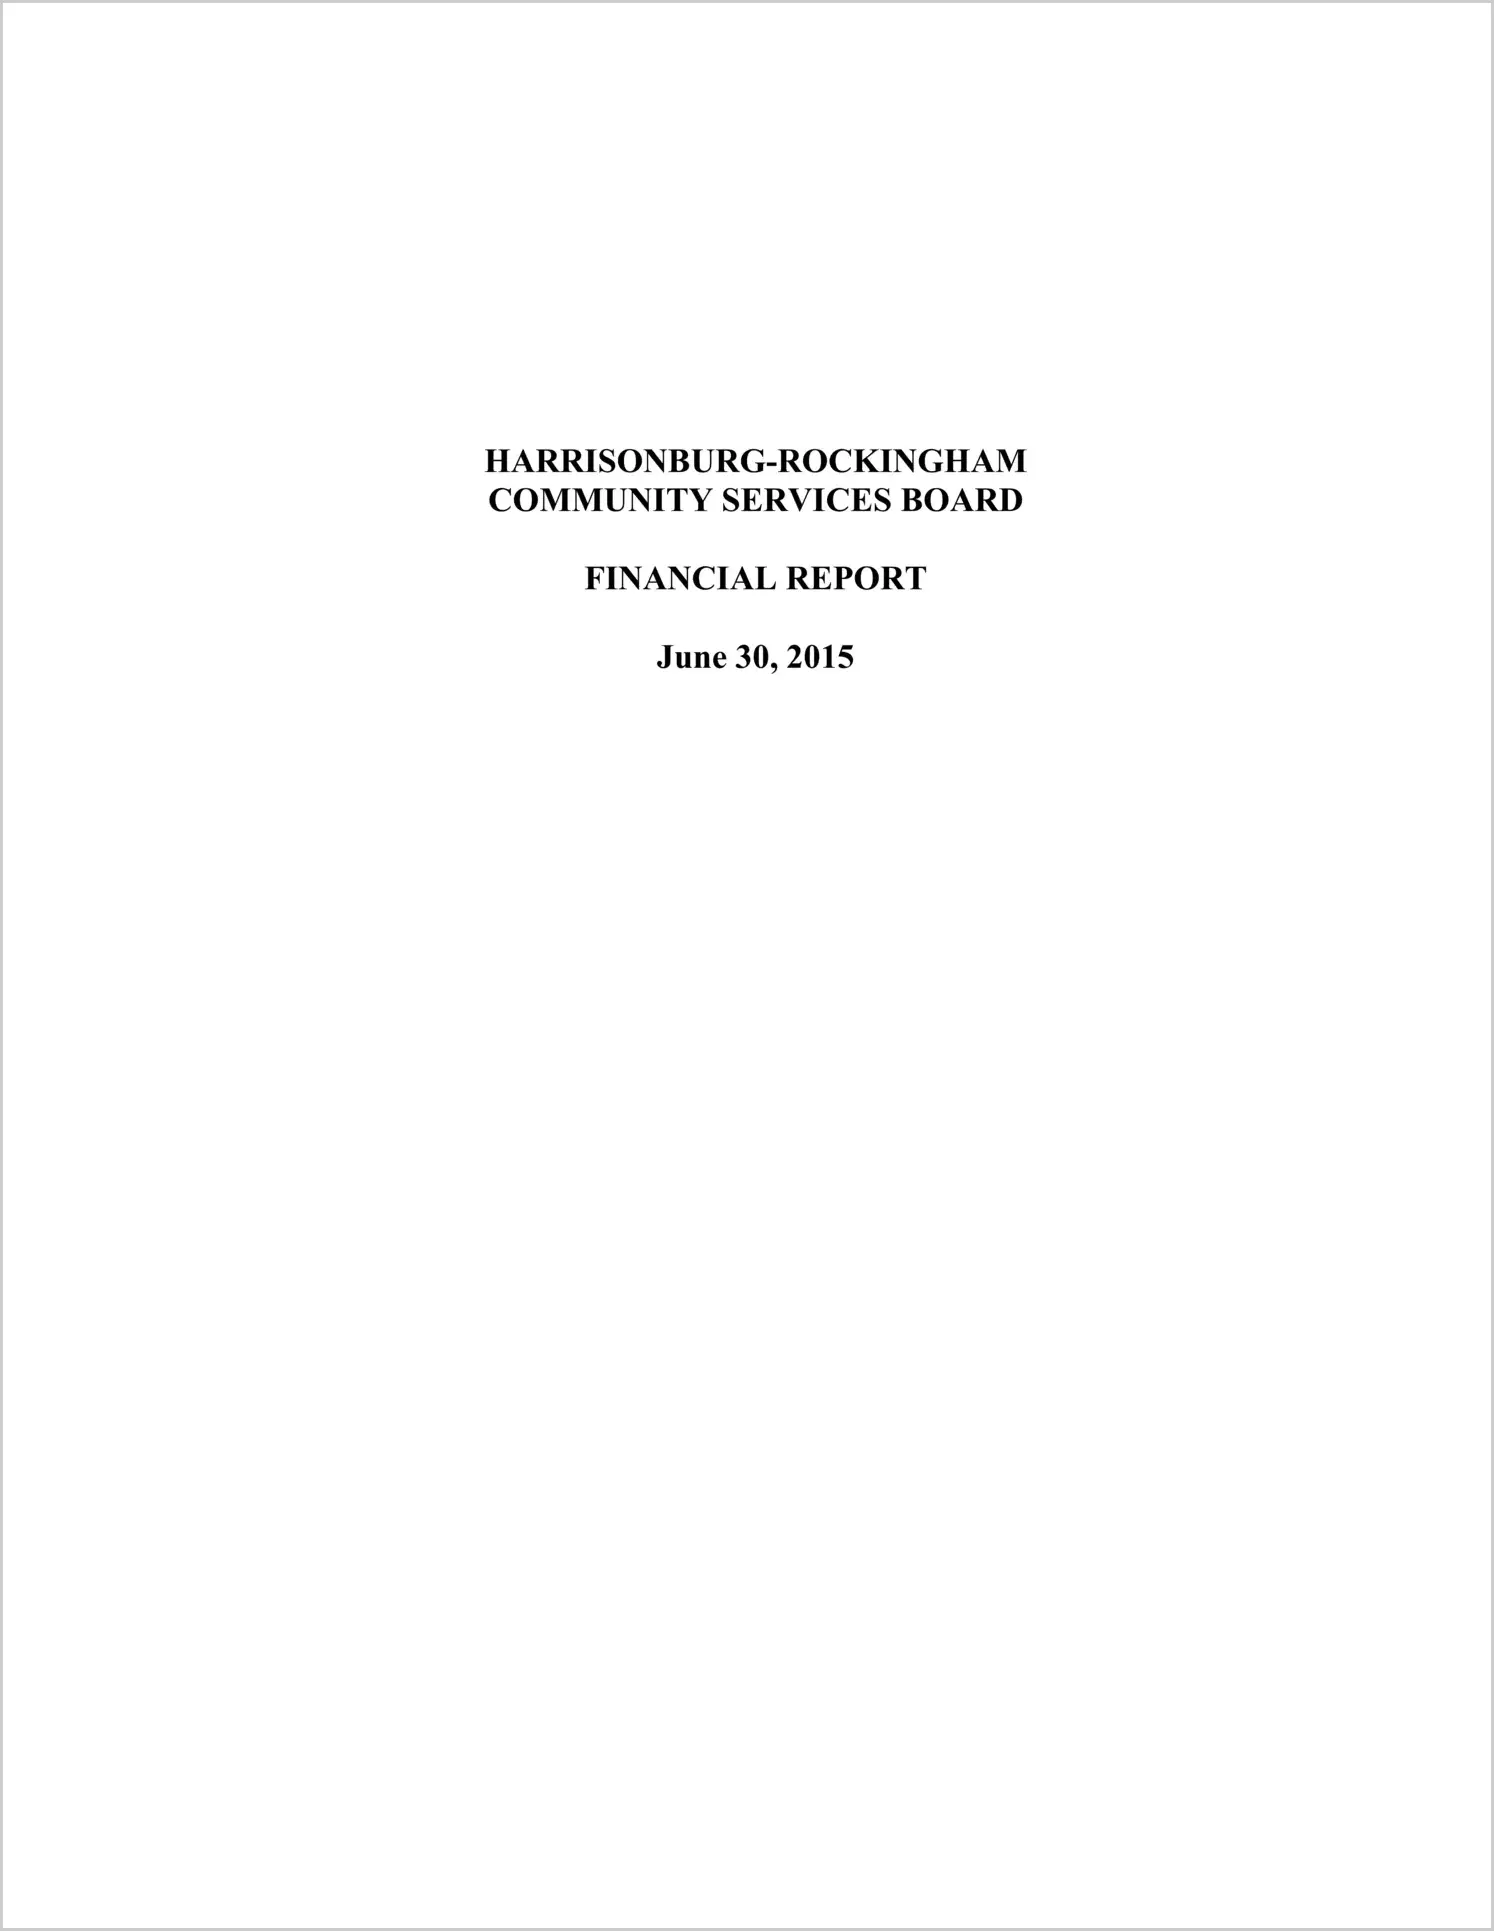 2015 ABC/Other Annual Financial Report  for Harrisonburg-Rockingham Community Services Board